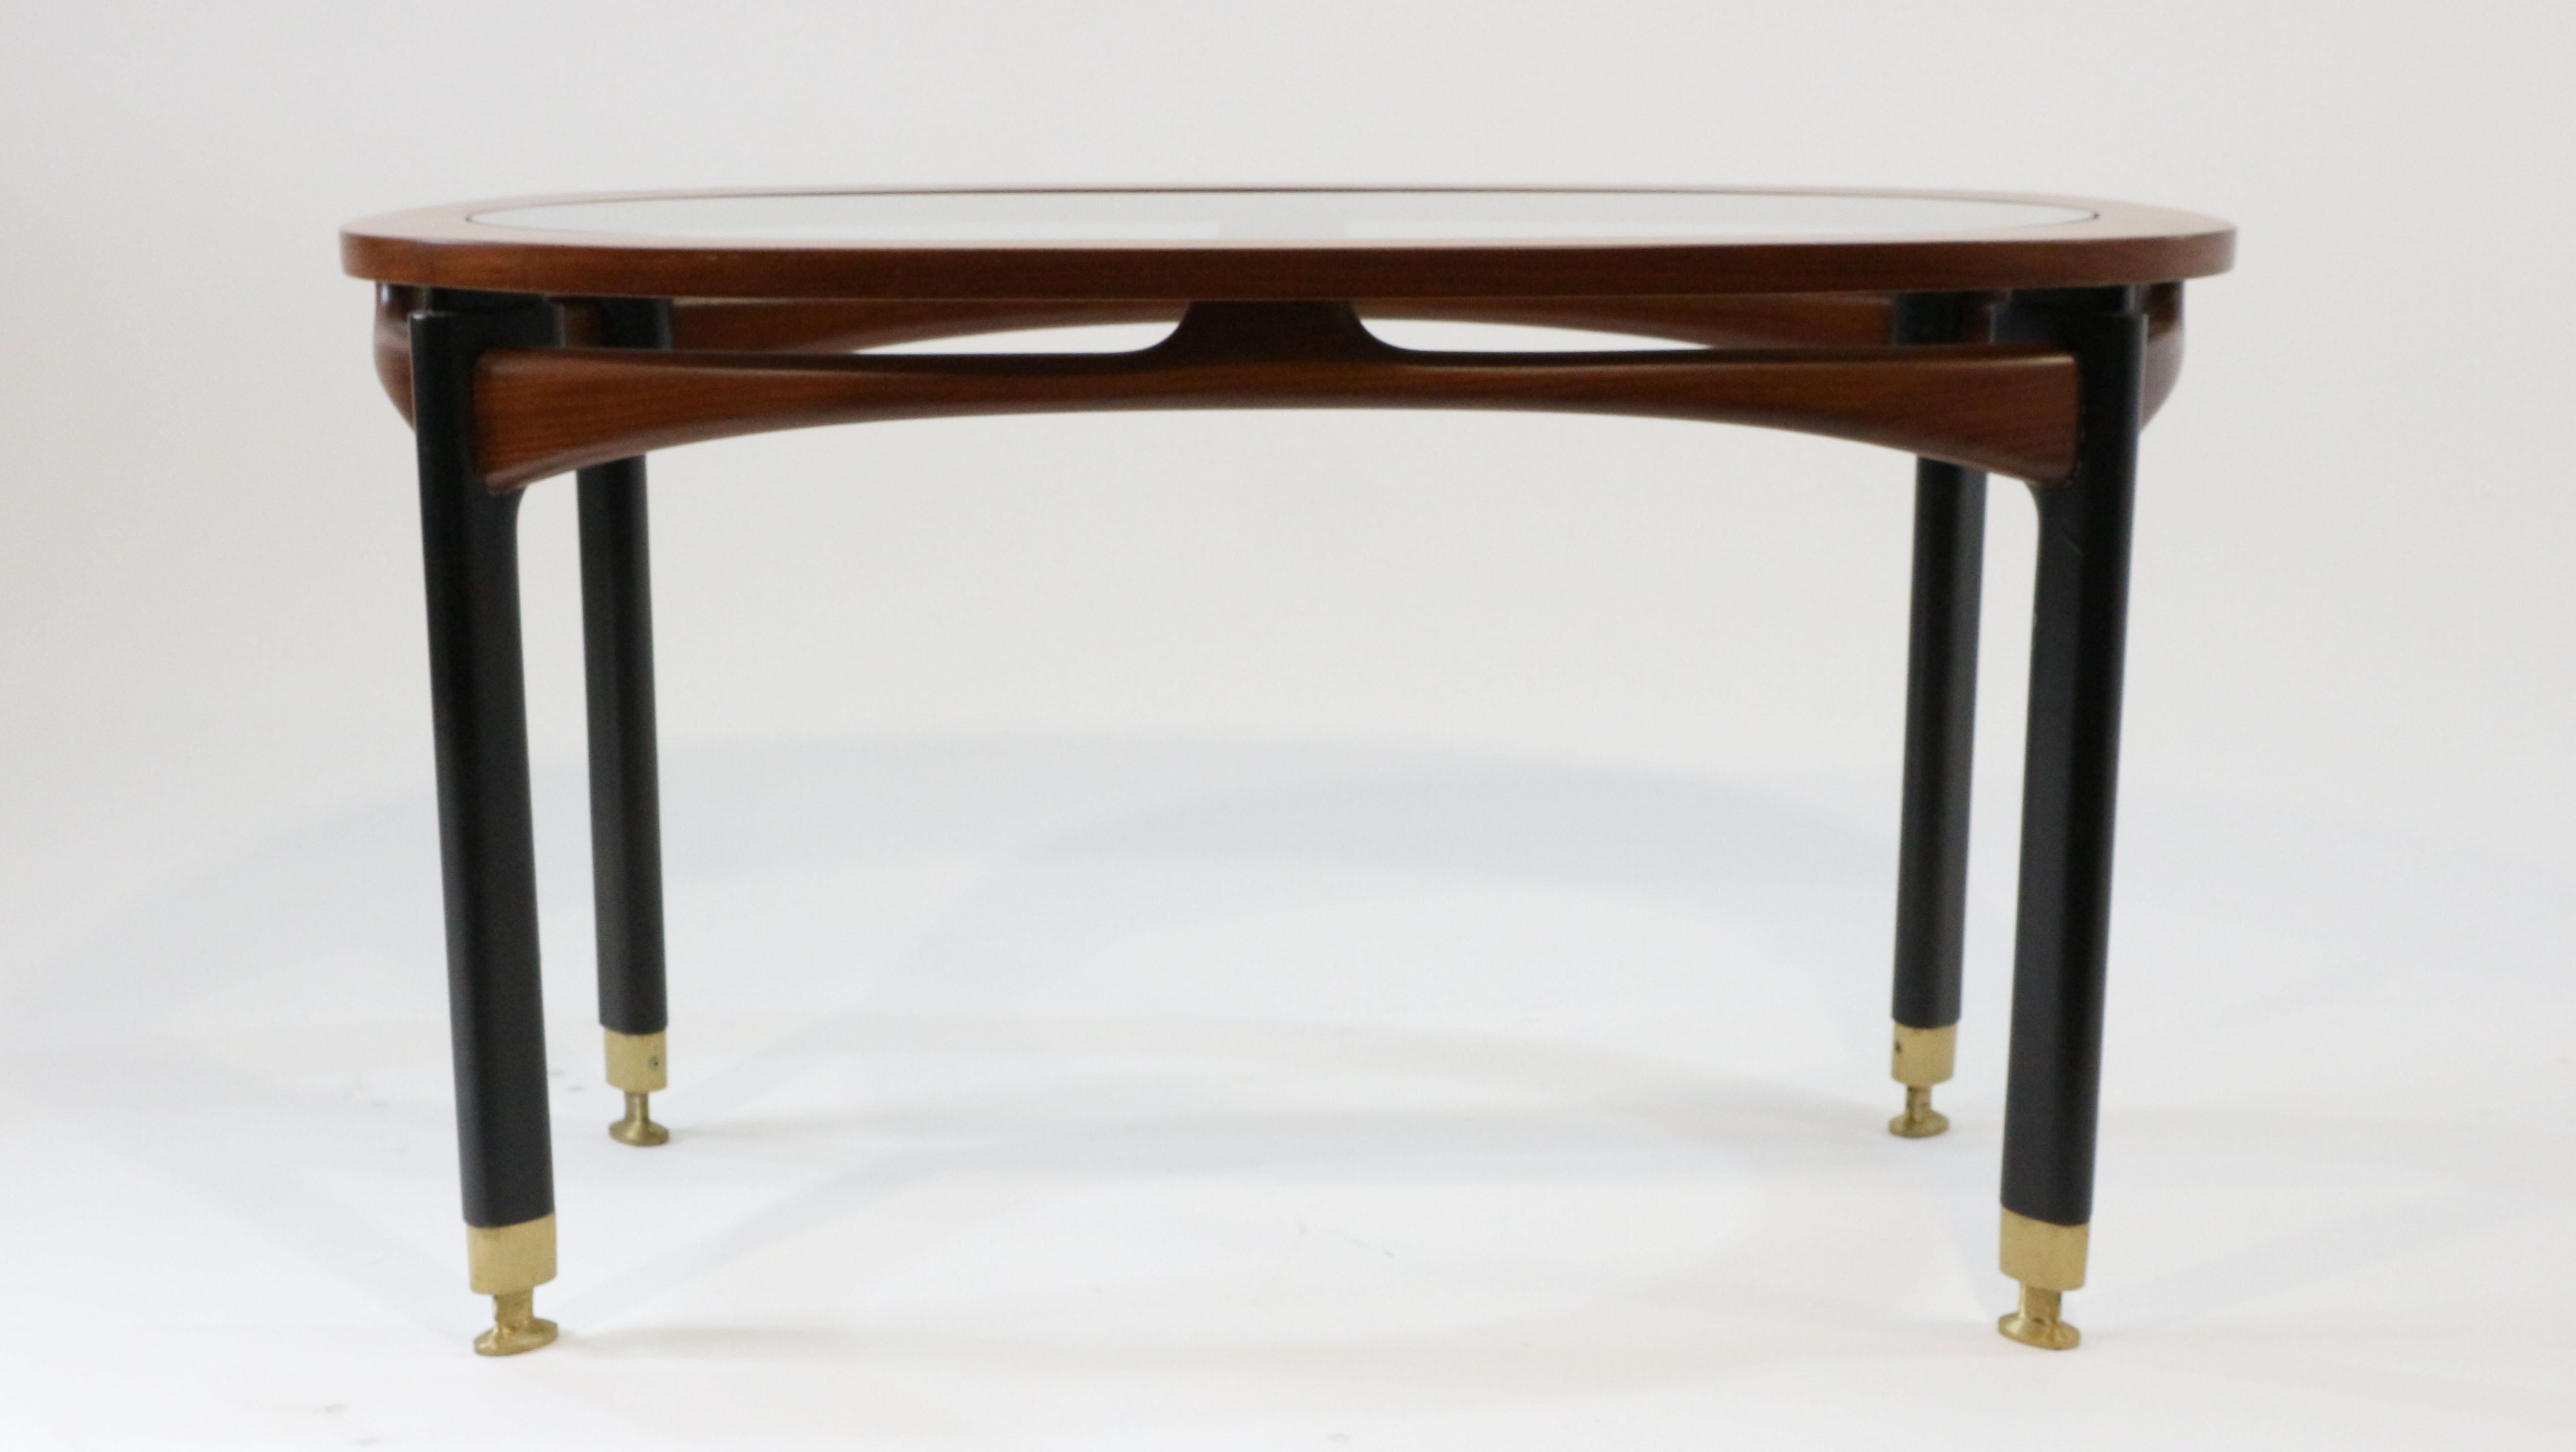 This coffee table, produced in the circa 1960.
Made whit wood, glass and brass.

The use of materials that sees the contrast of natural wood and painted in black whit feet made of brass in a very precise, make this coffee table a small jewel of the